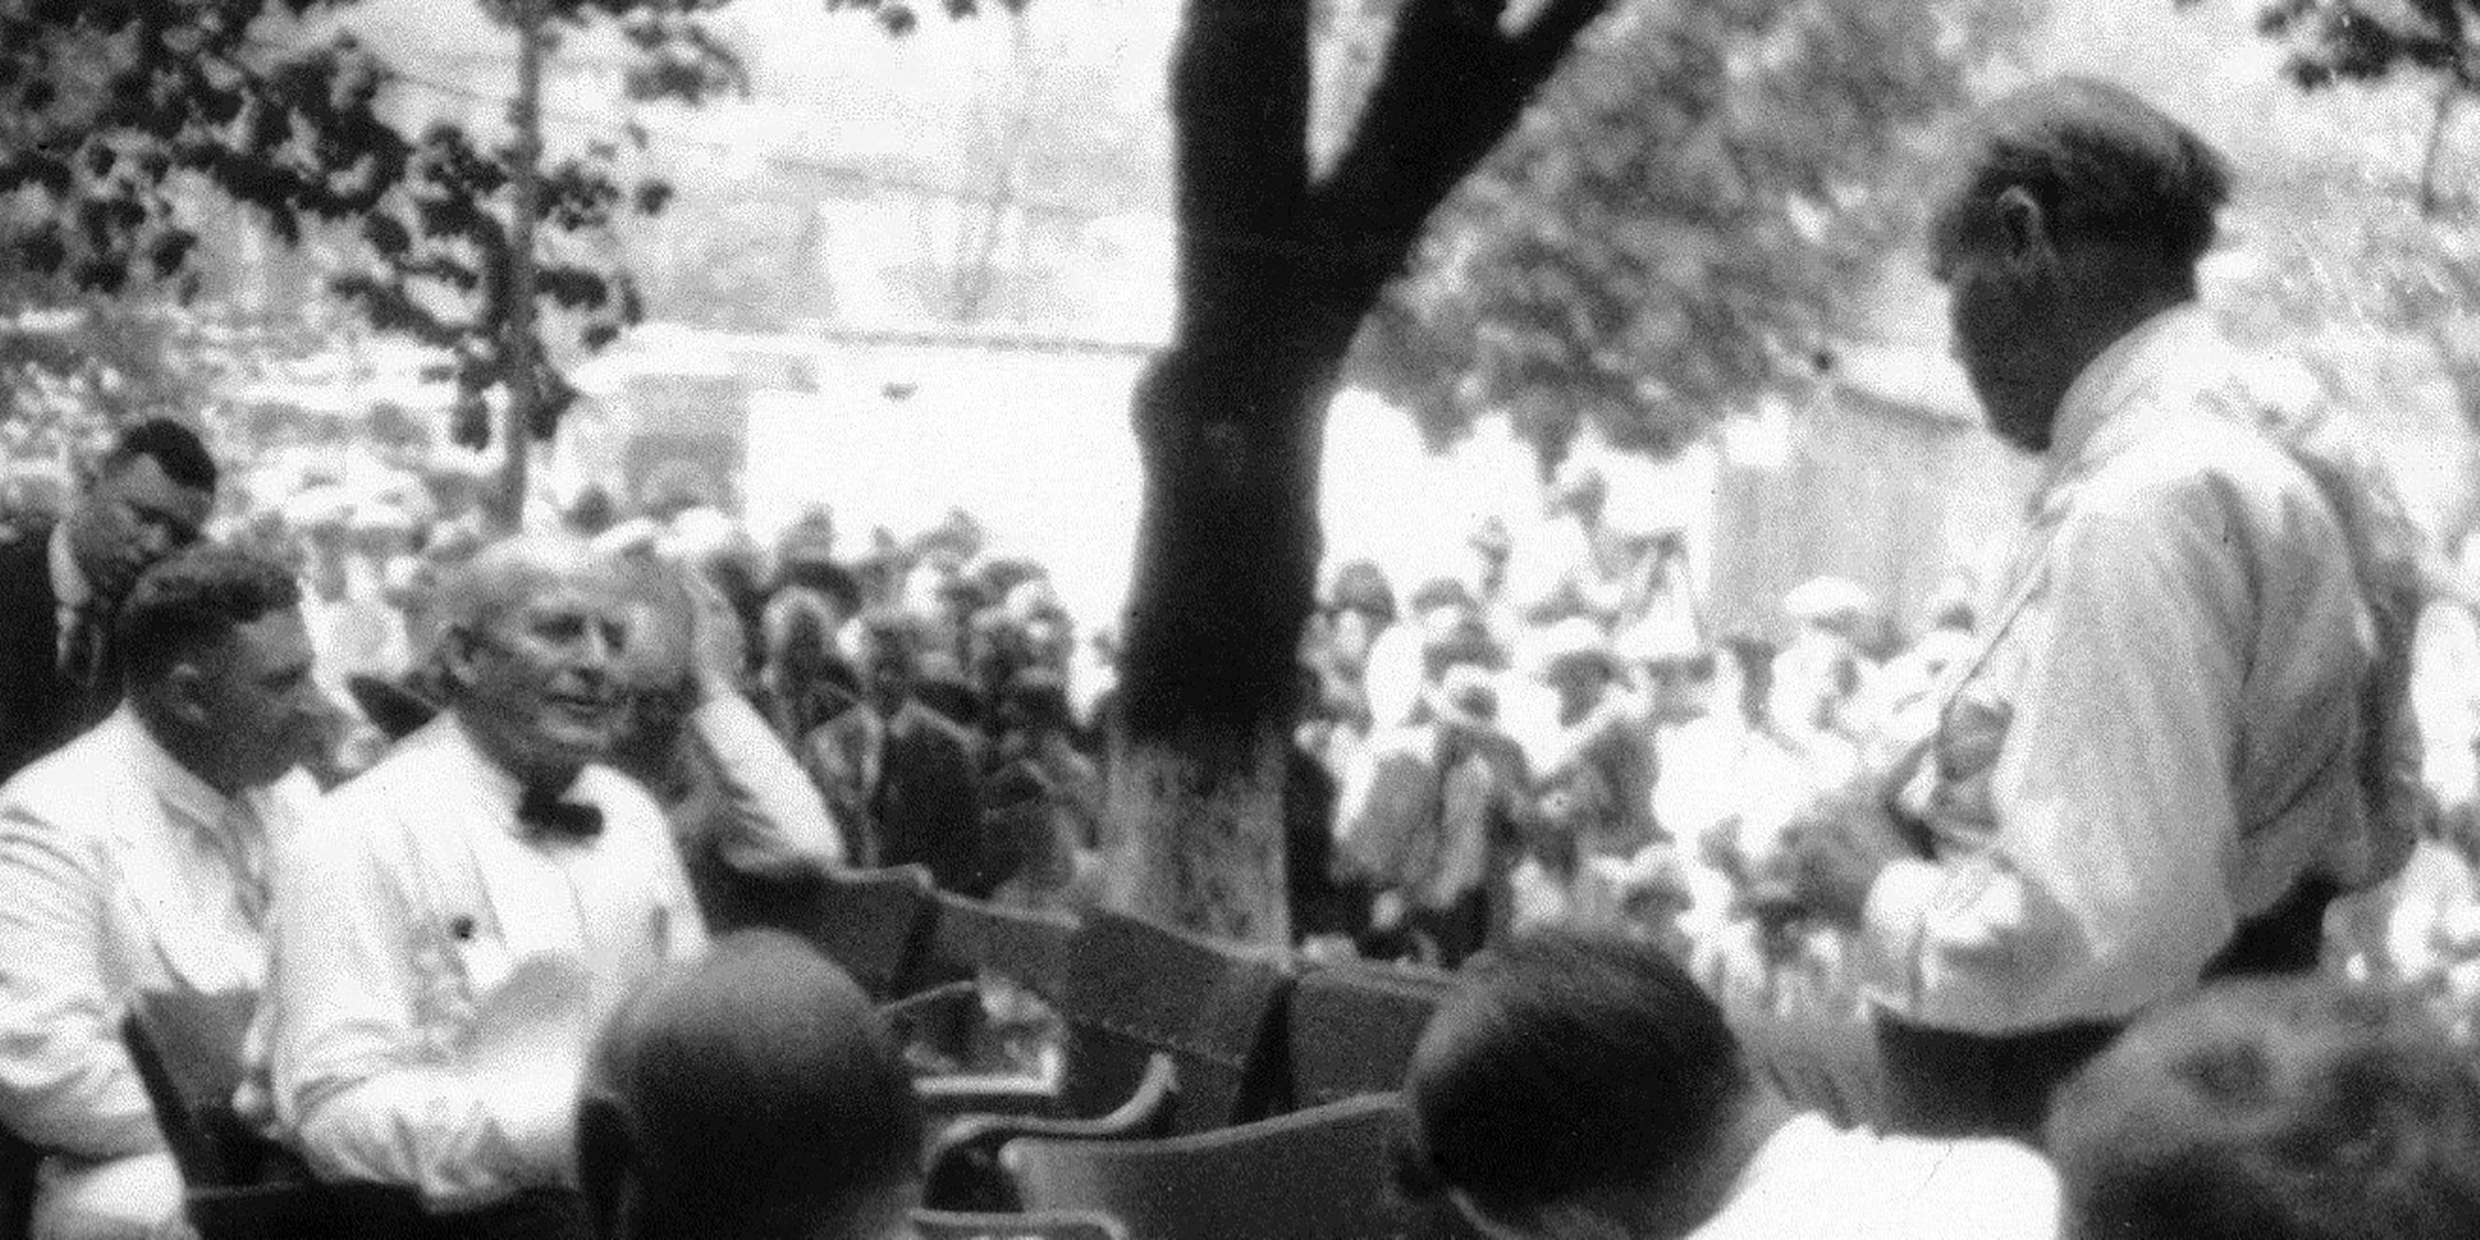 Black and white photo of a debate at the Scopes Trial